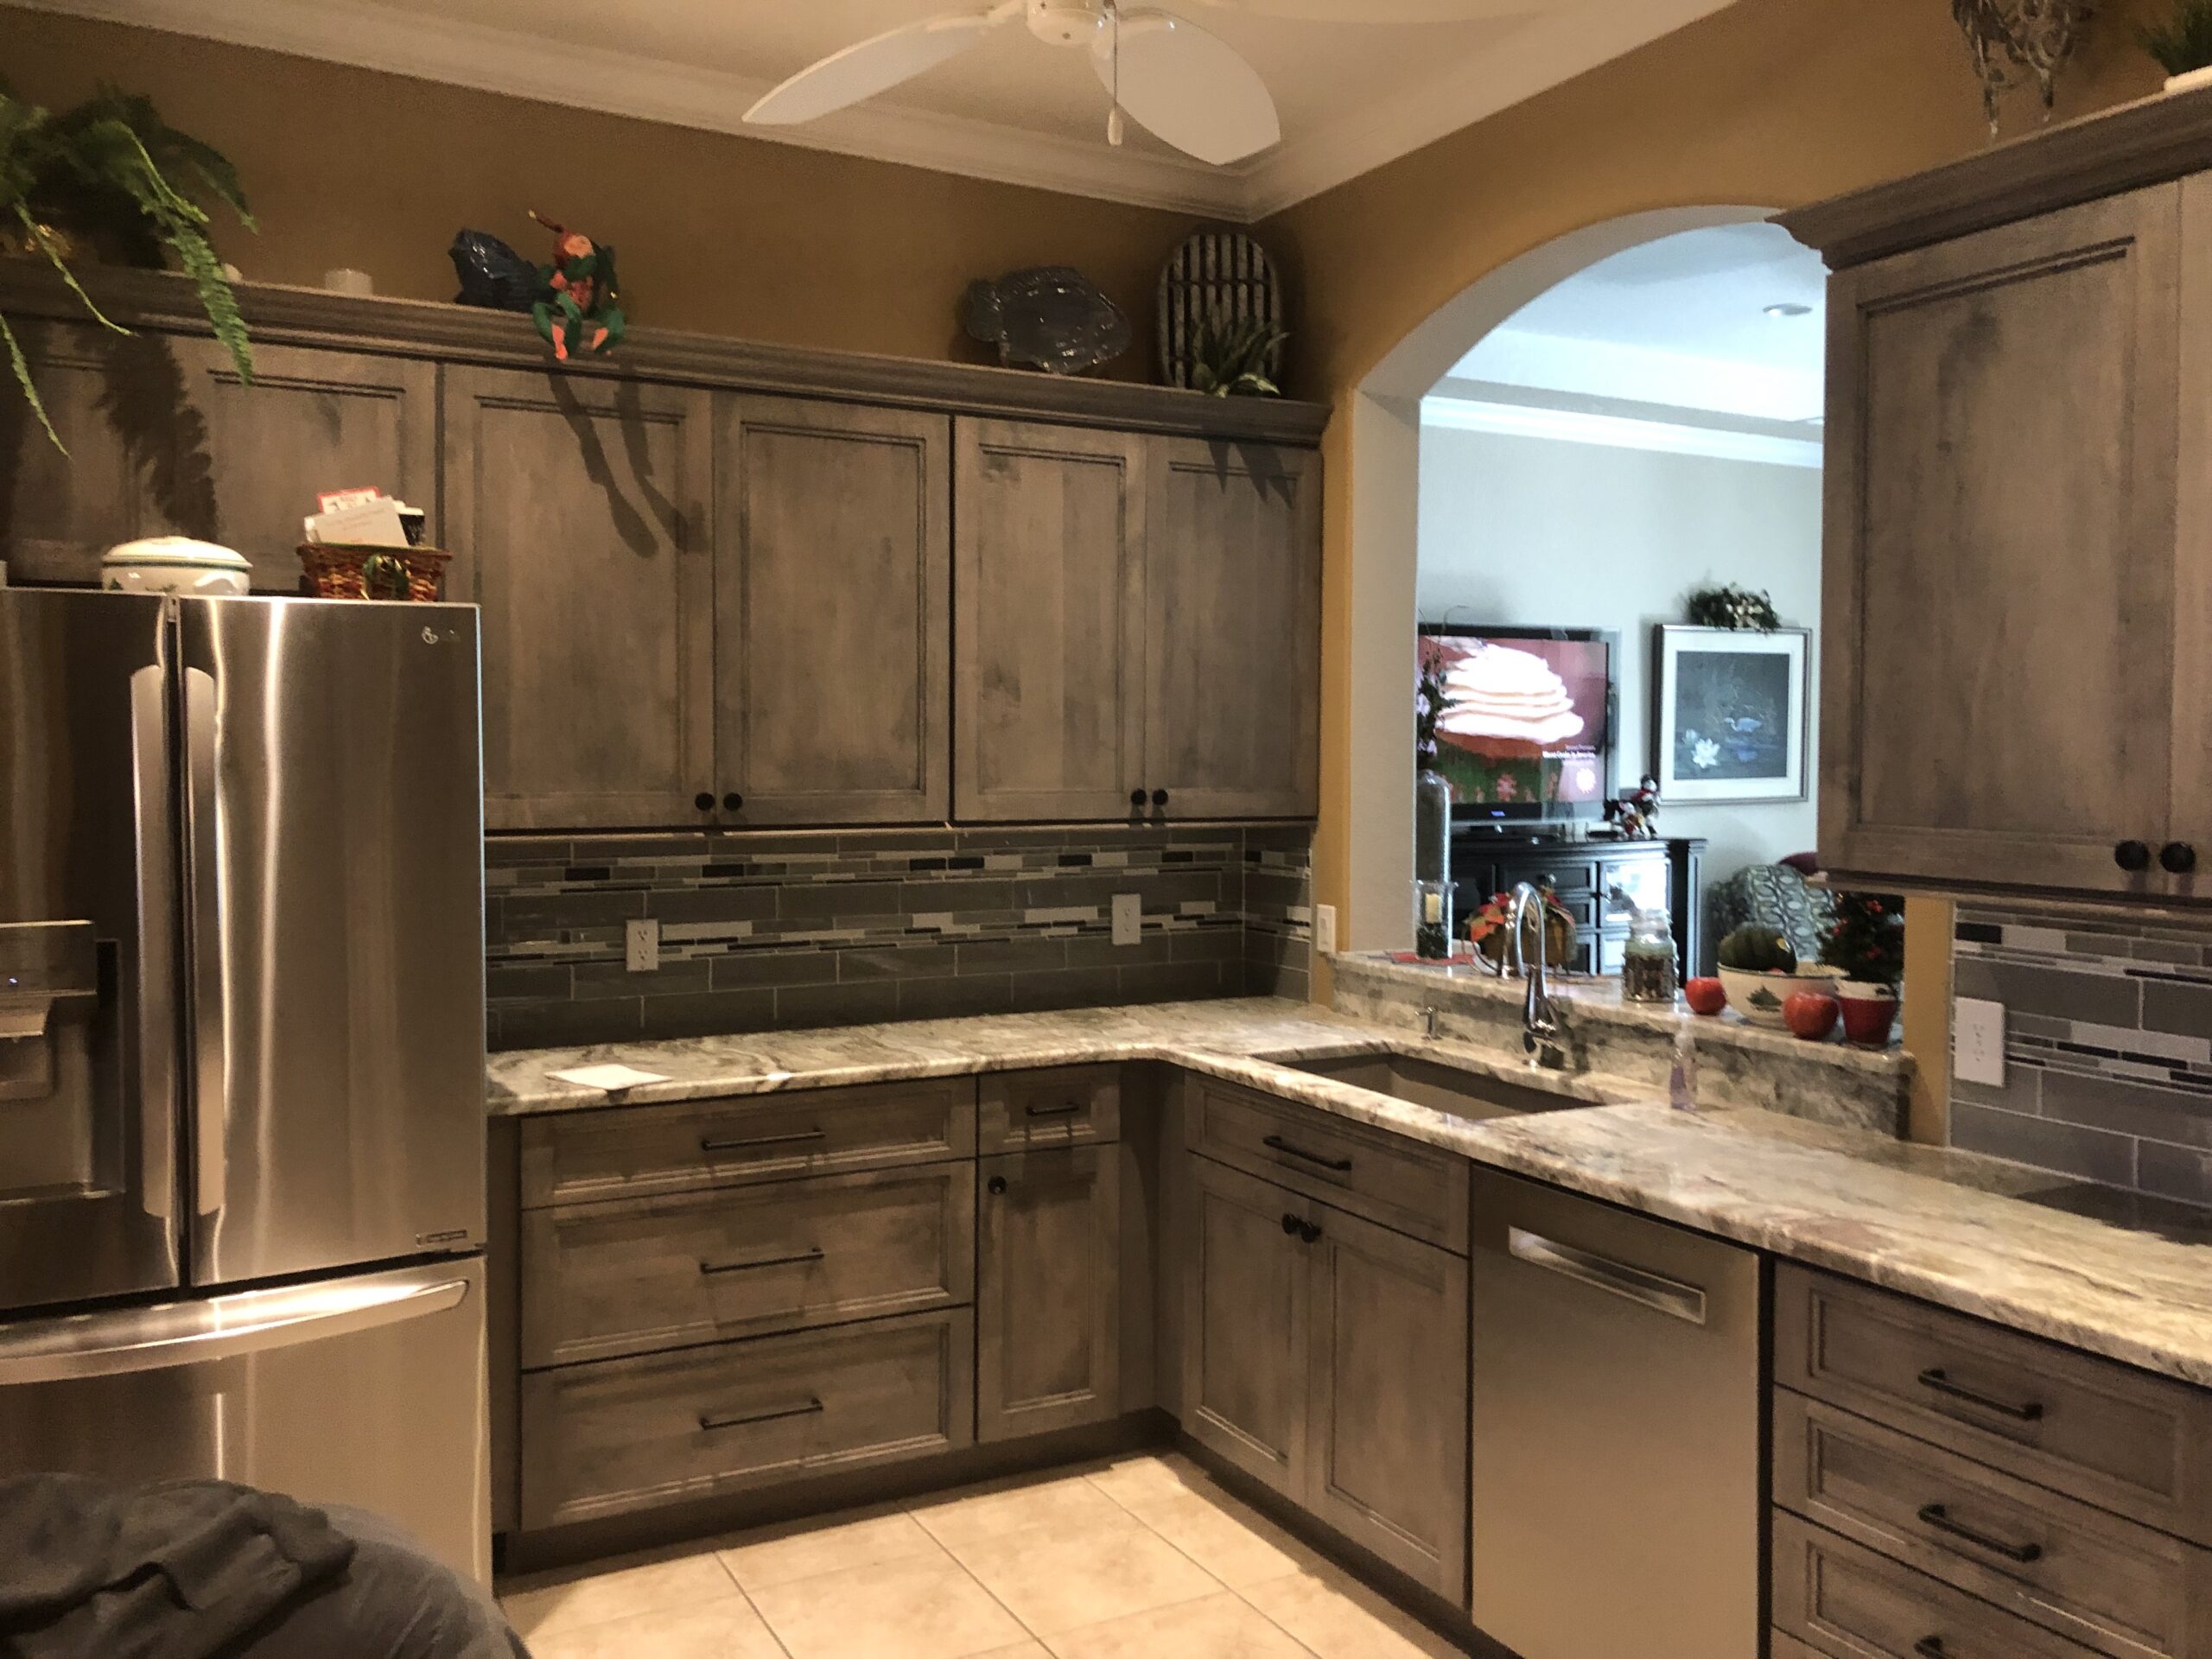 Modern, Stylish, and High Quality Stained Cherry Kitchen Cabinet Refacing in Oldsmar